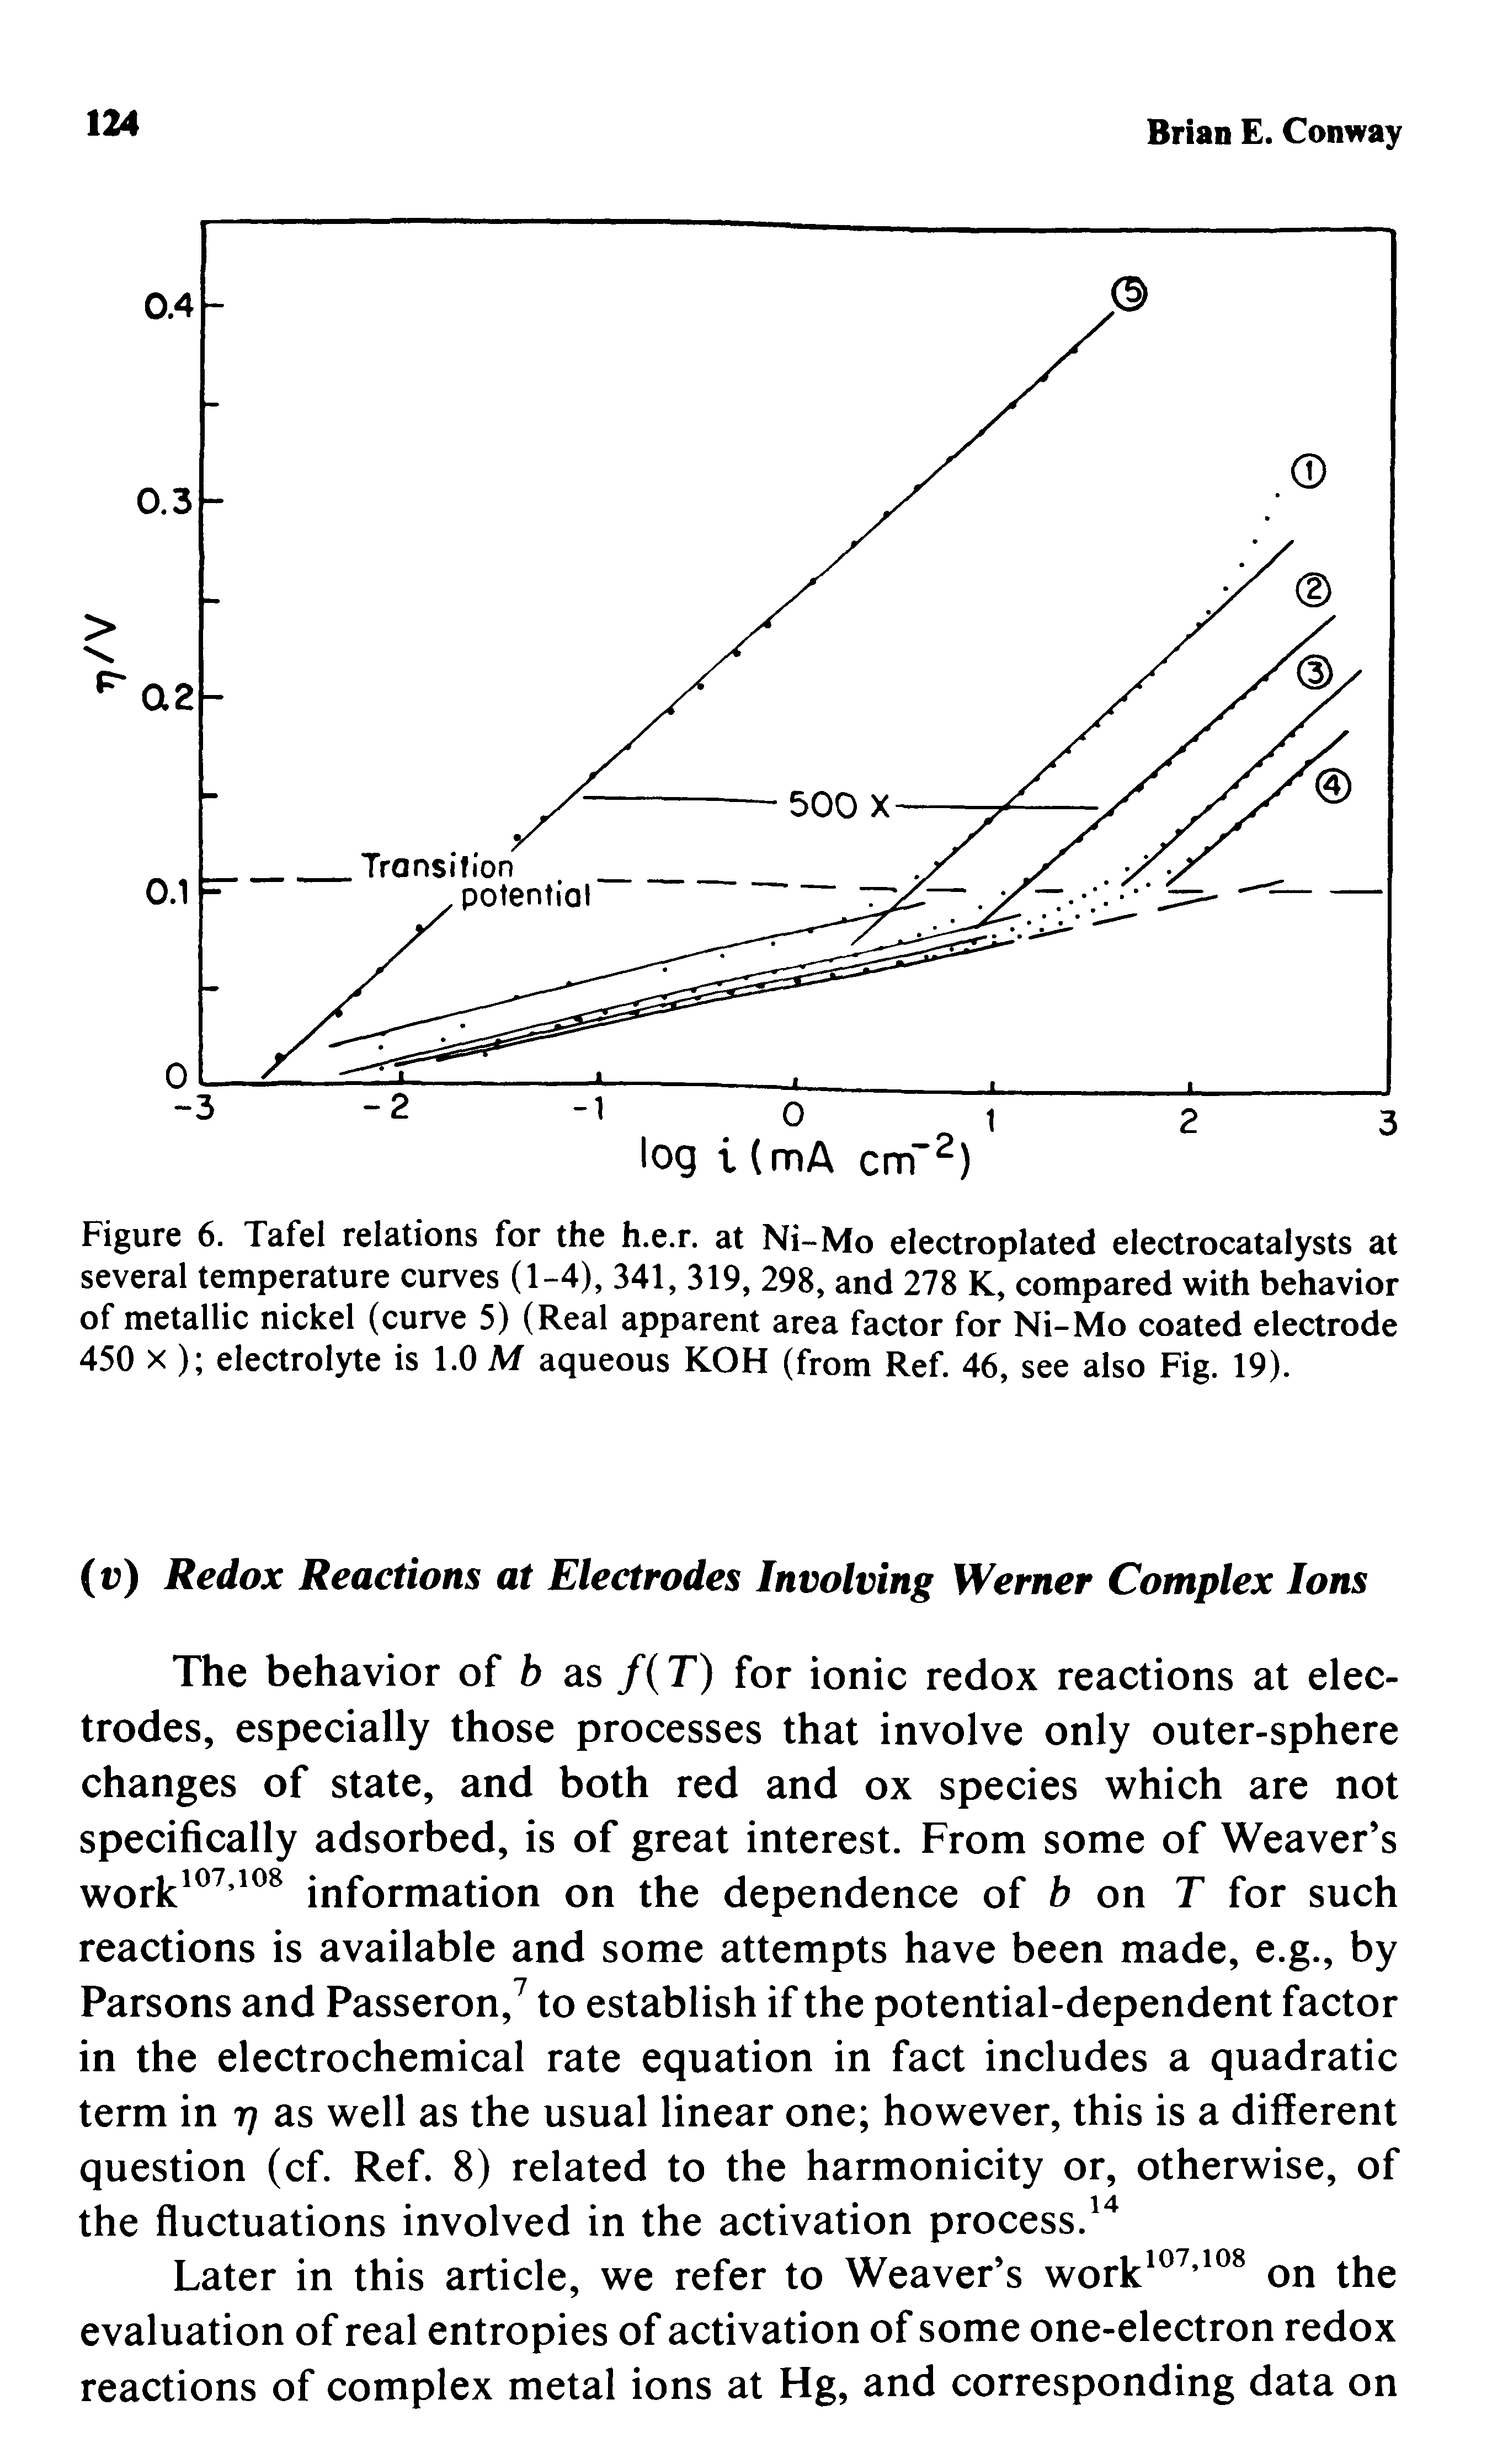 Figure 6. Tafel relations for the h.e.r. at Ni-Mo electroplated electrocatalysts at several temperature curves (1-4), 341, 319, 298, and 278 K, compared with behavior of metallic nickel (curve 5) (Real apparent area factor for Ni-Mo coated electrode 450 X ) electrolyte is 1.0 M aqueous KOH (from Ref. 46, see also Fig. 19).